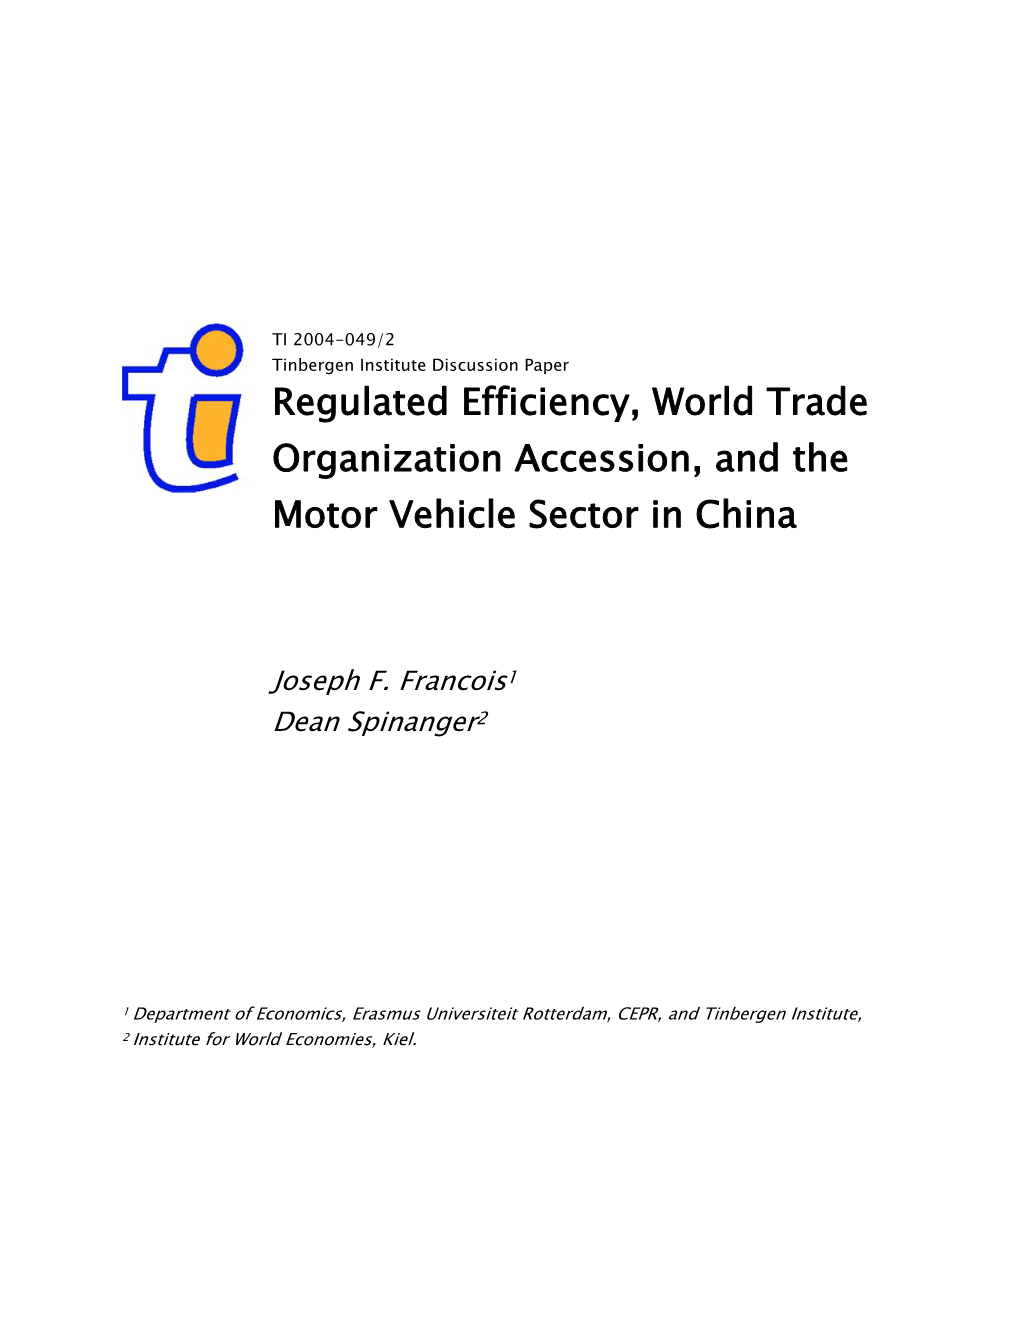 Regulated Efficiency, World Trade Organization Accession, and The